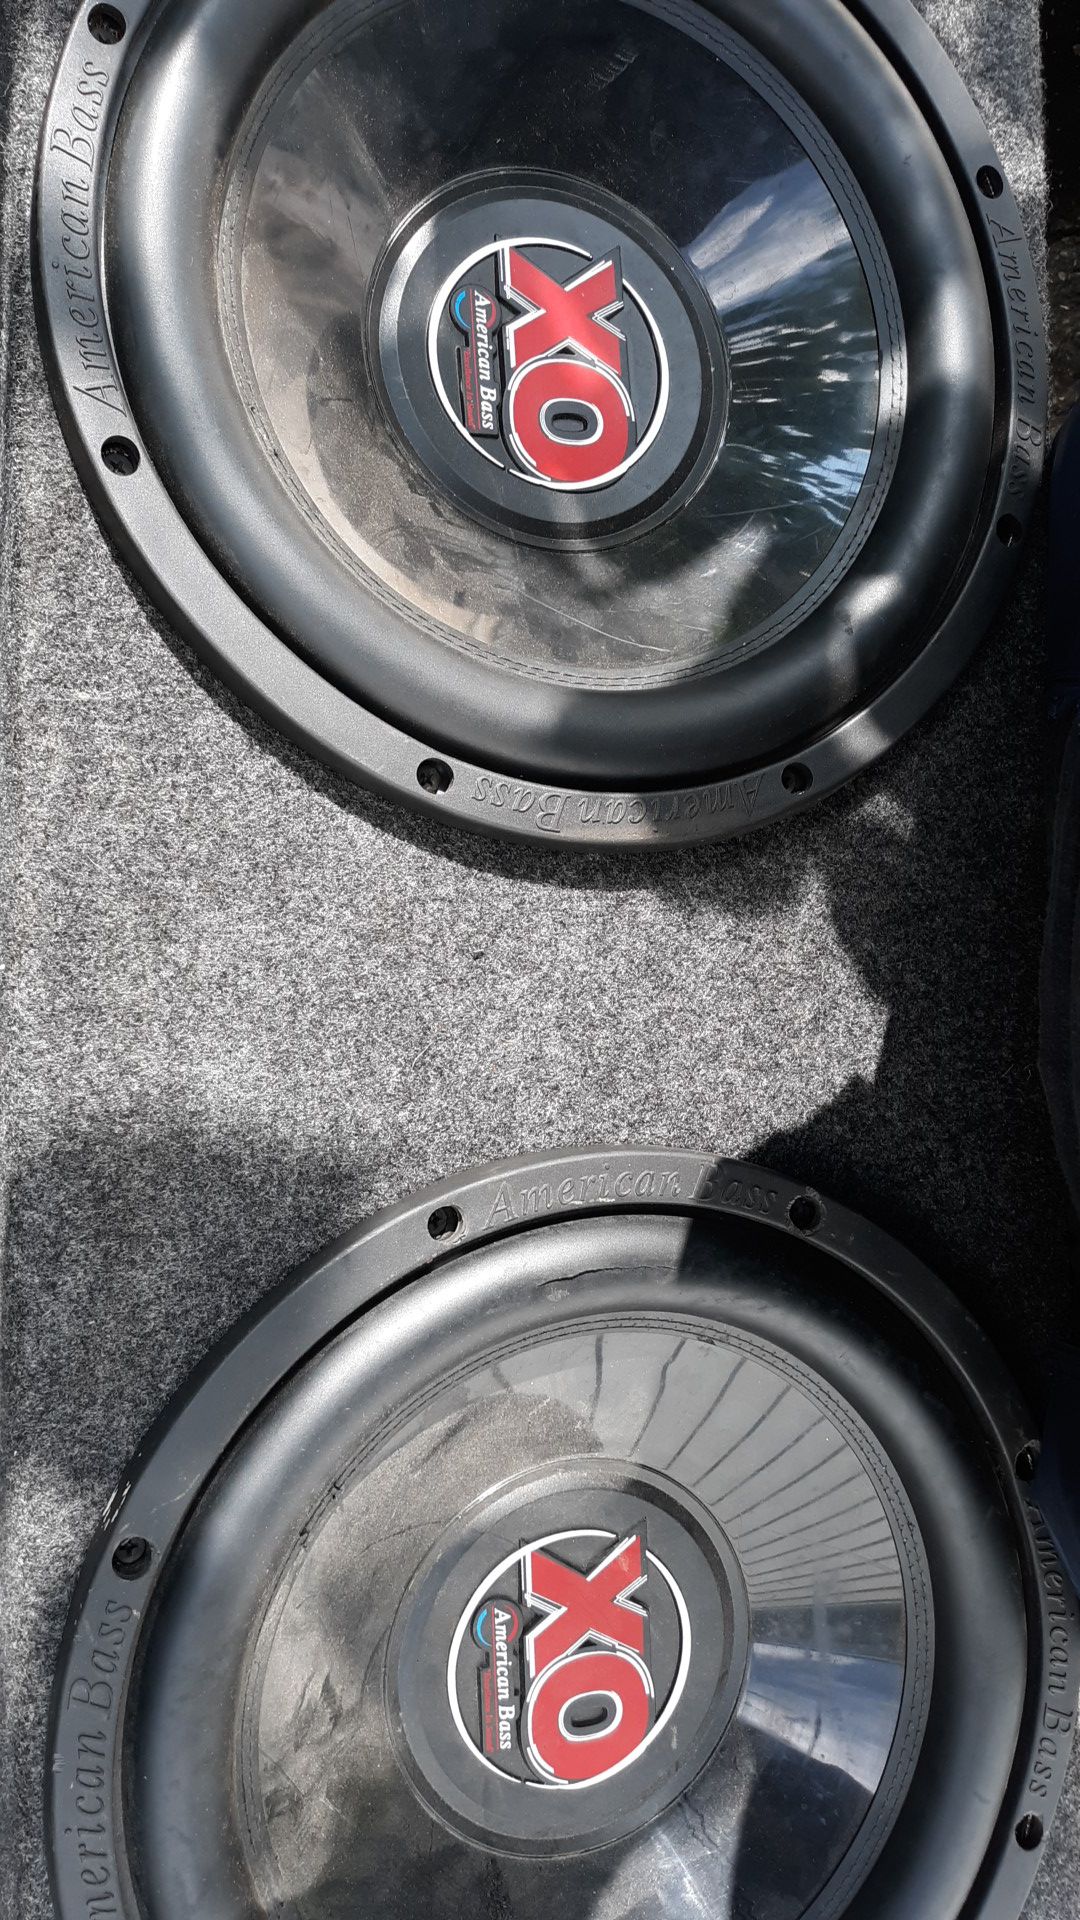 Americans bass Speakers for low